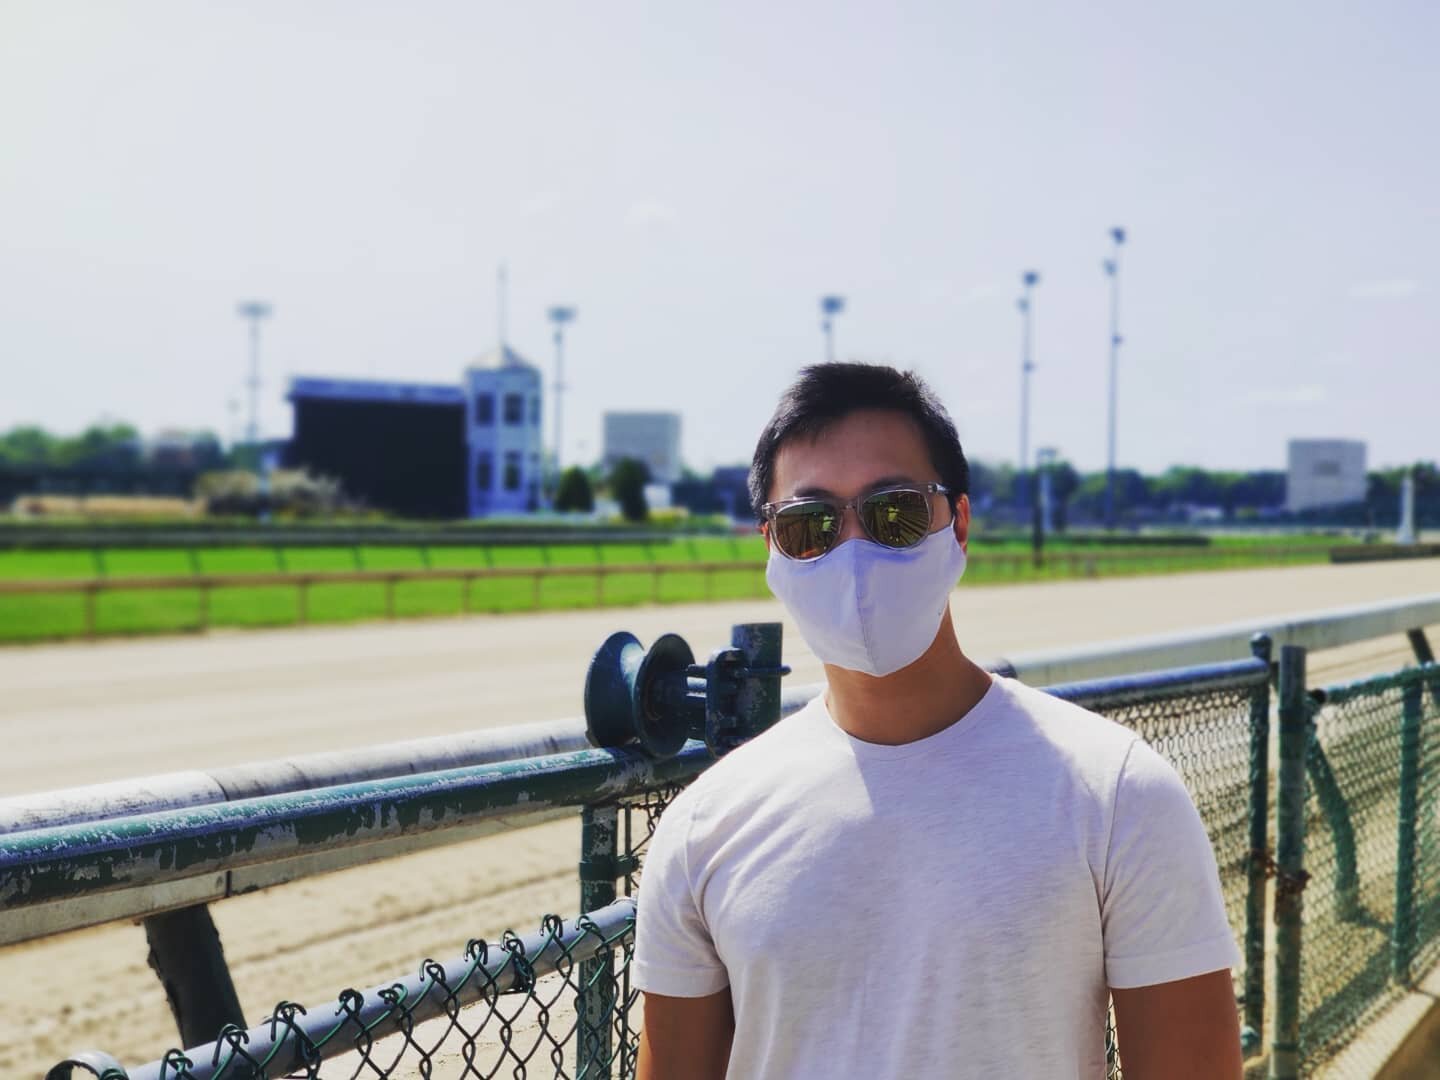 Derby 🏇🏇🏇🏇🏇🏇

-
-
-
-
-

#Travel #kentuckyderby #Kentucky #Derby #HorseRace #Track #Tour #Racetrack #Maskon #GayTravel #Subglasses #menfashion #tee #CausalStyle #warbyparker #pride🌈